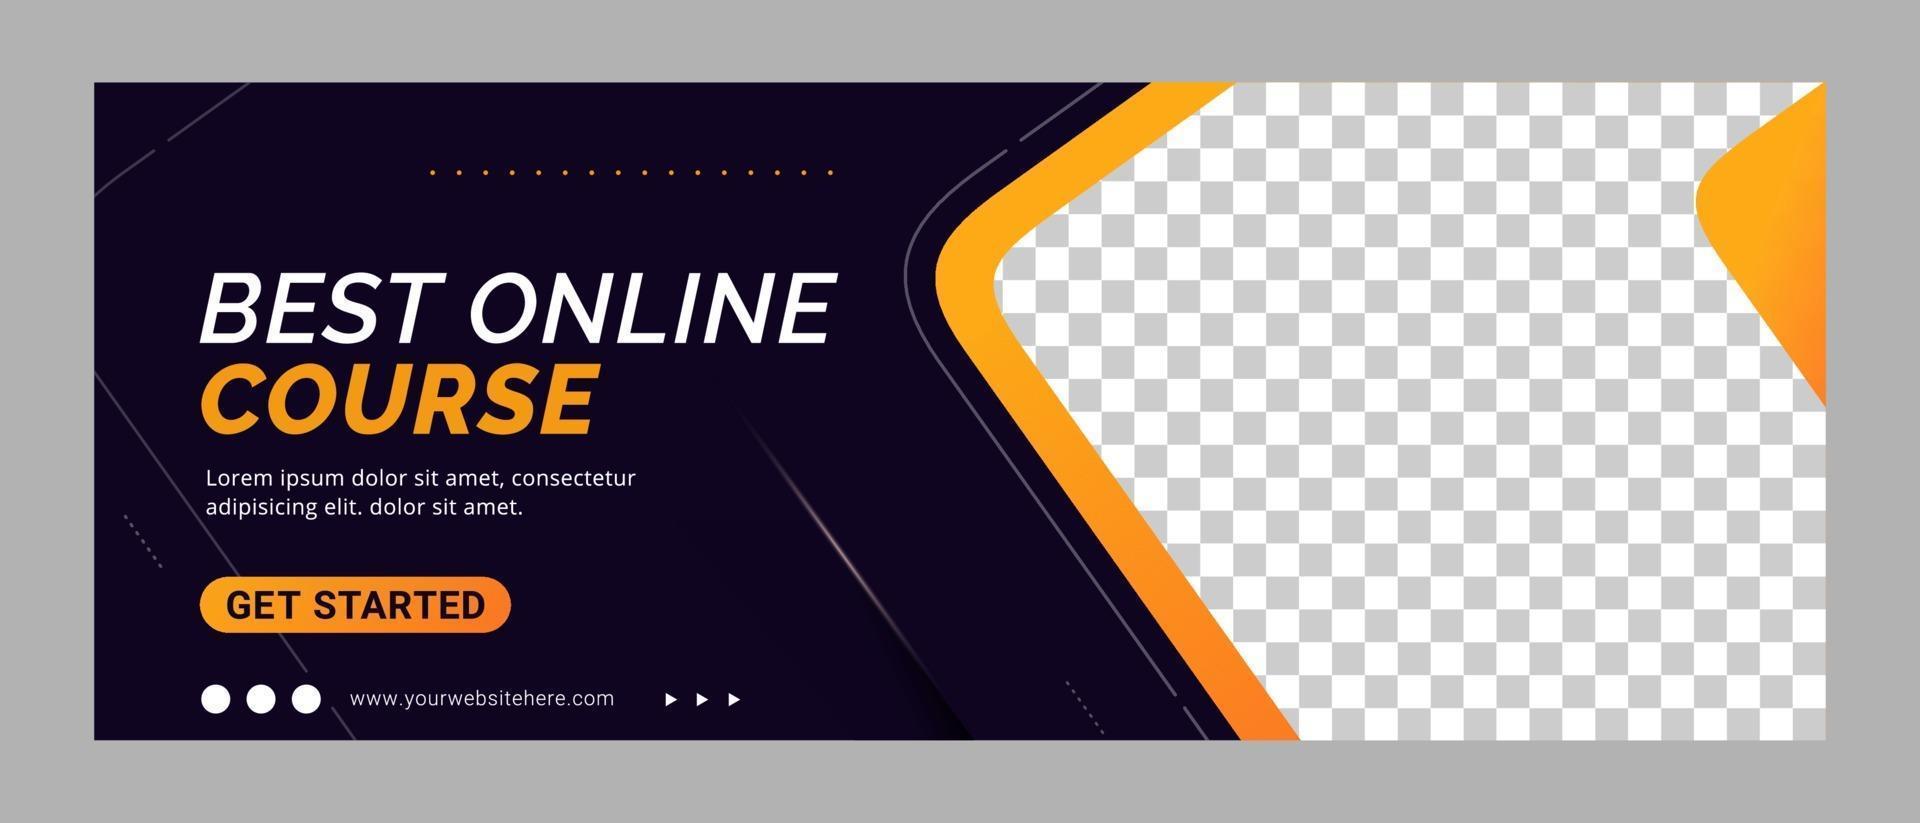 Online course social media cover banner template promotion vector